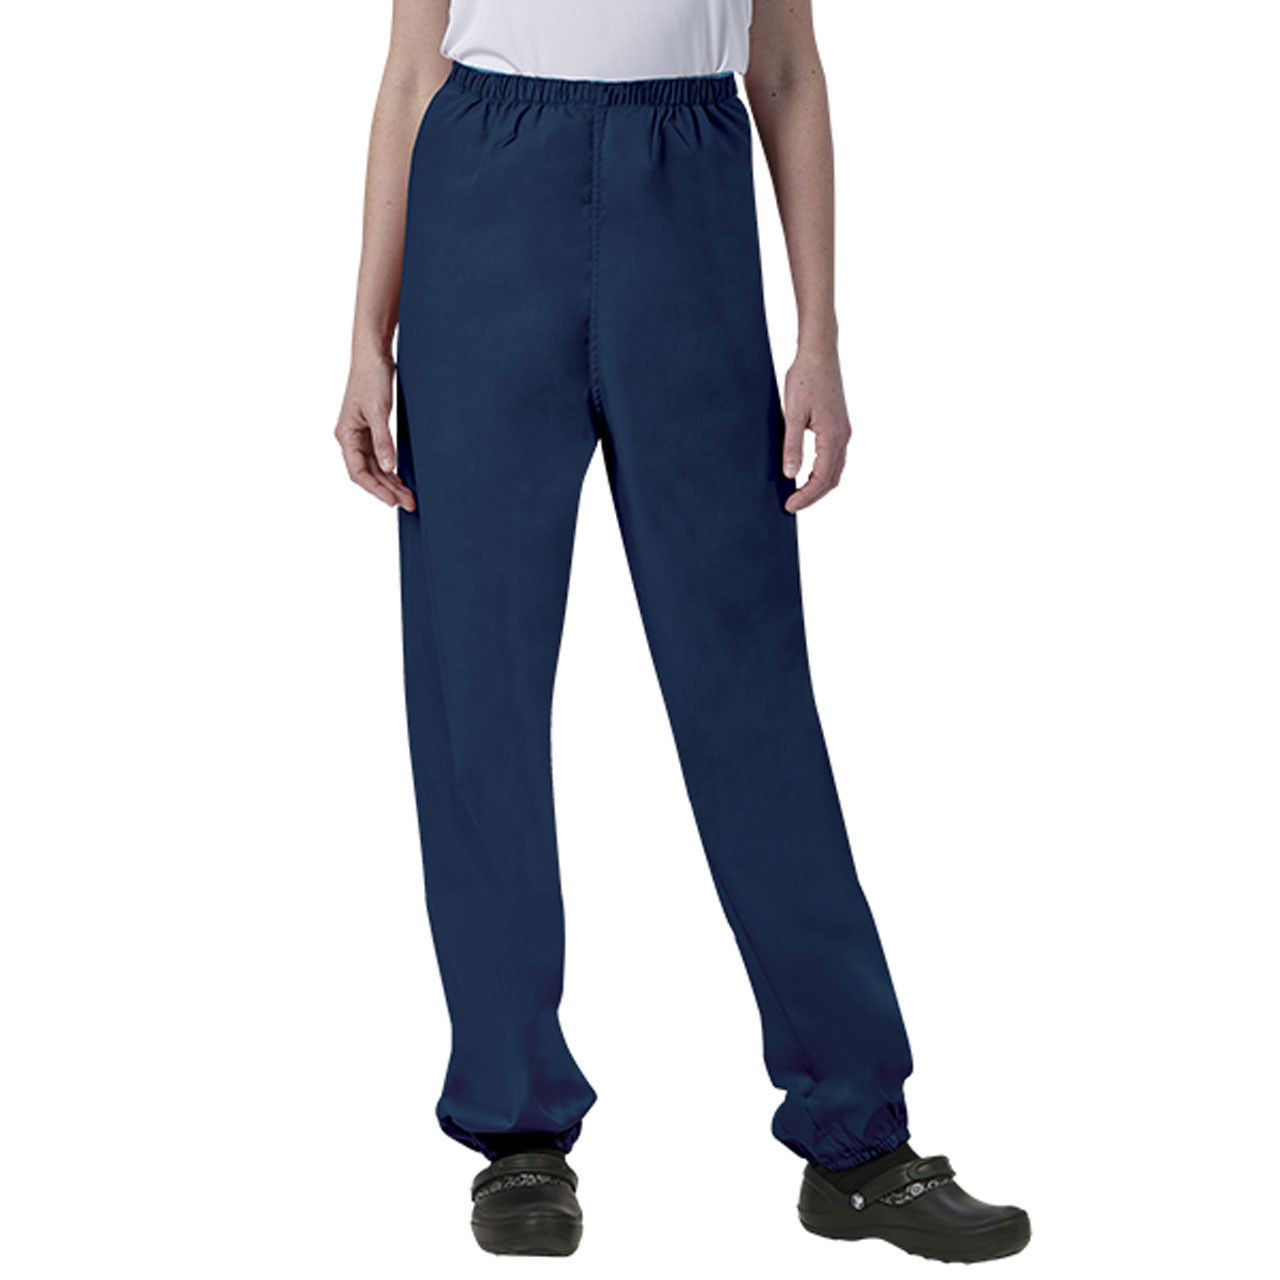 Is the fabric quality good for these Fashion Seal Healthcare scrub pants?